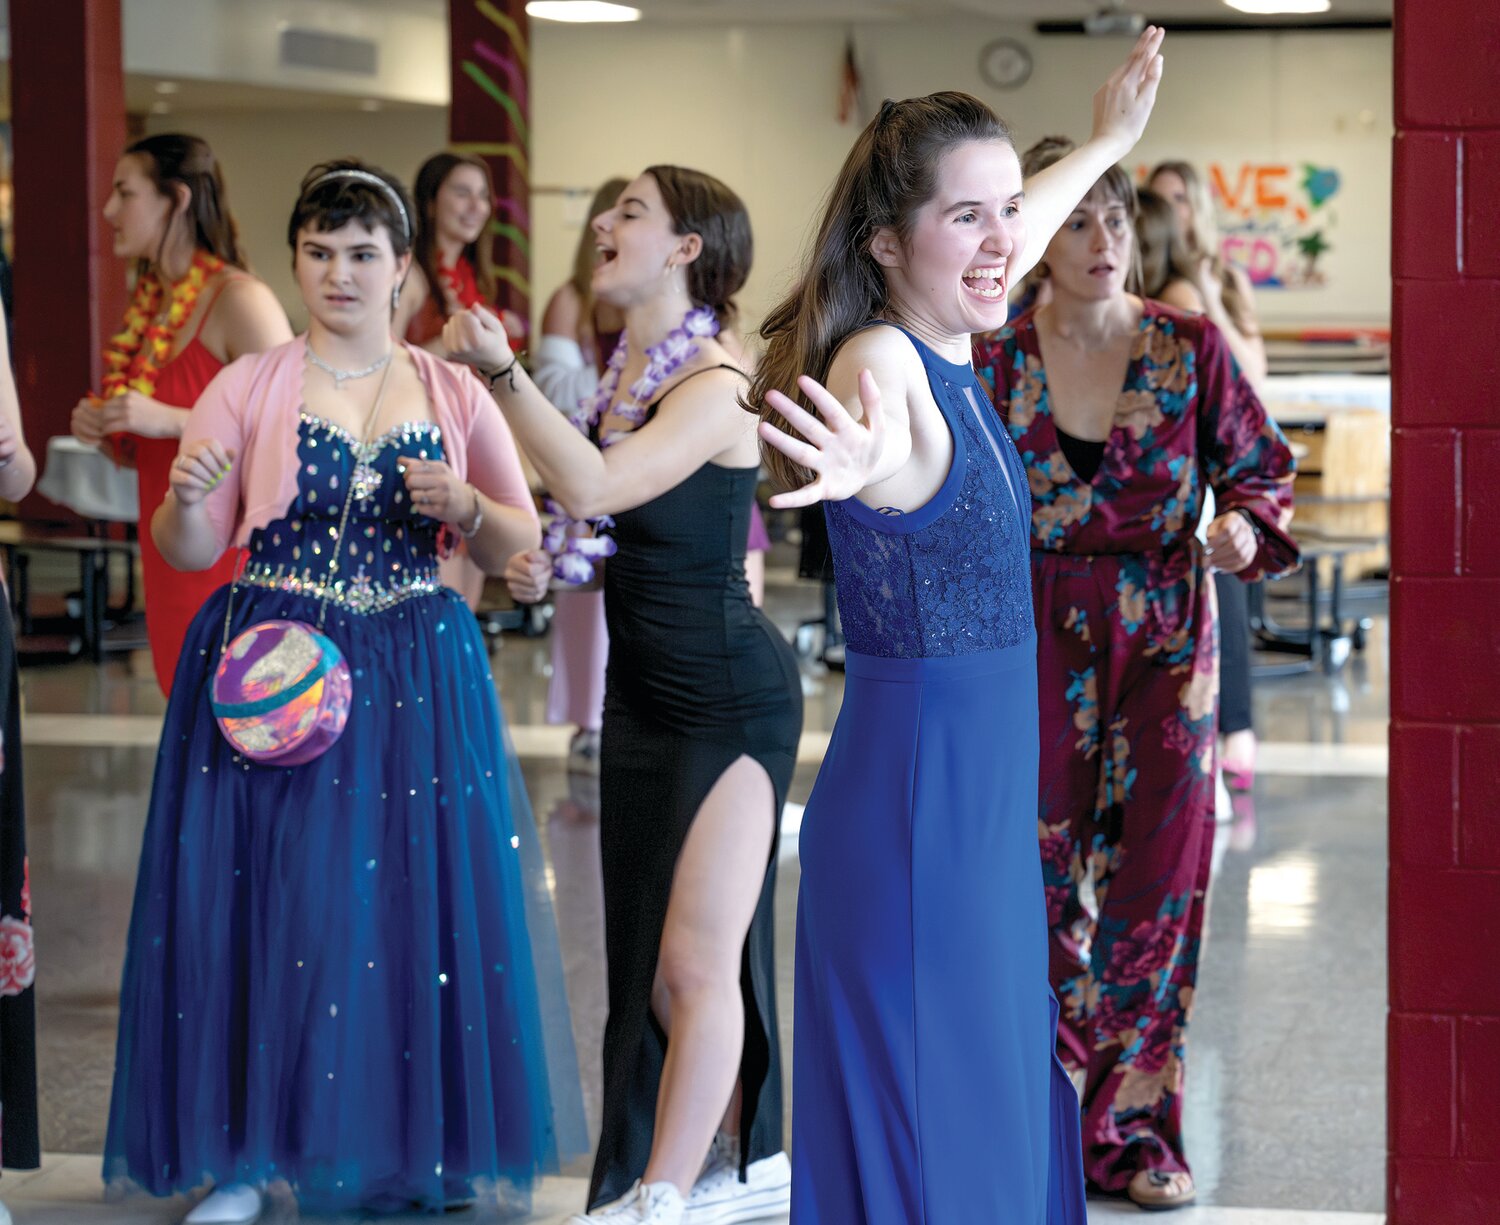 Evi McCormack, Calli Pasternack and Rachel Southard gather with friends to dance during Central Bucks East High School’s first Unified Prom.